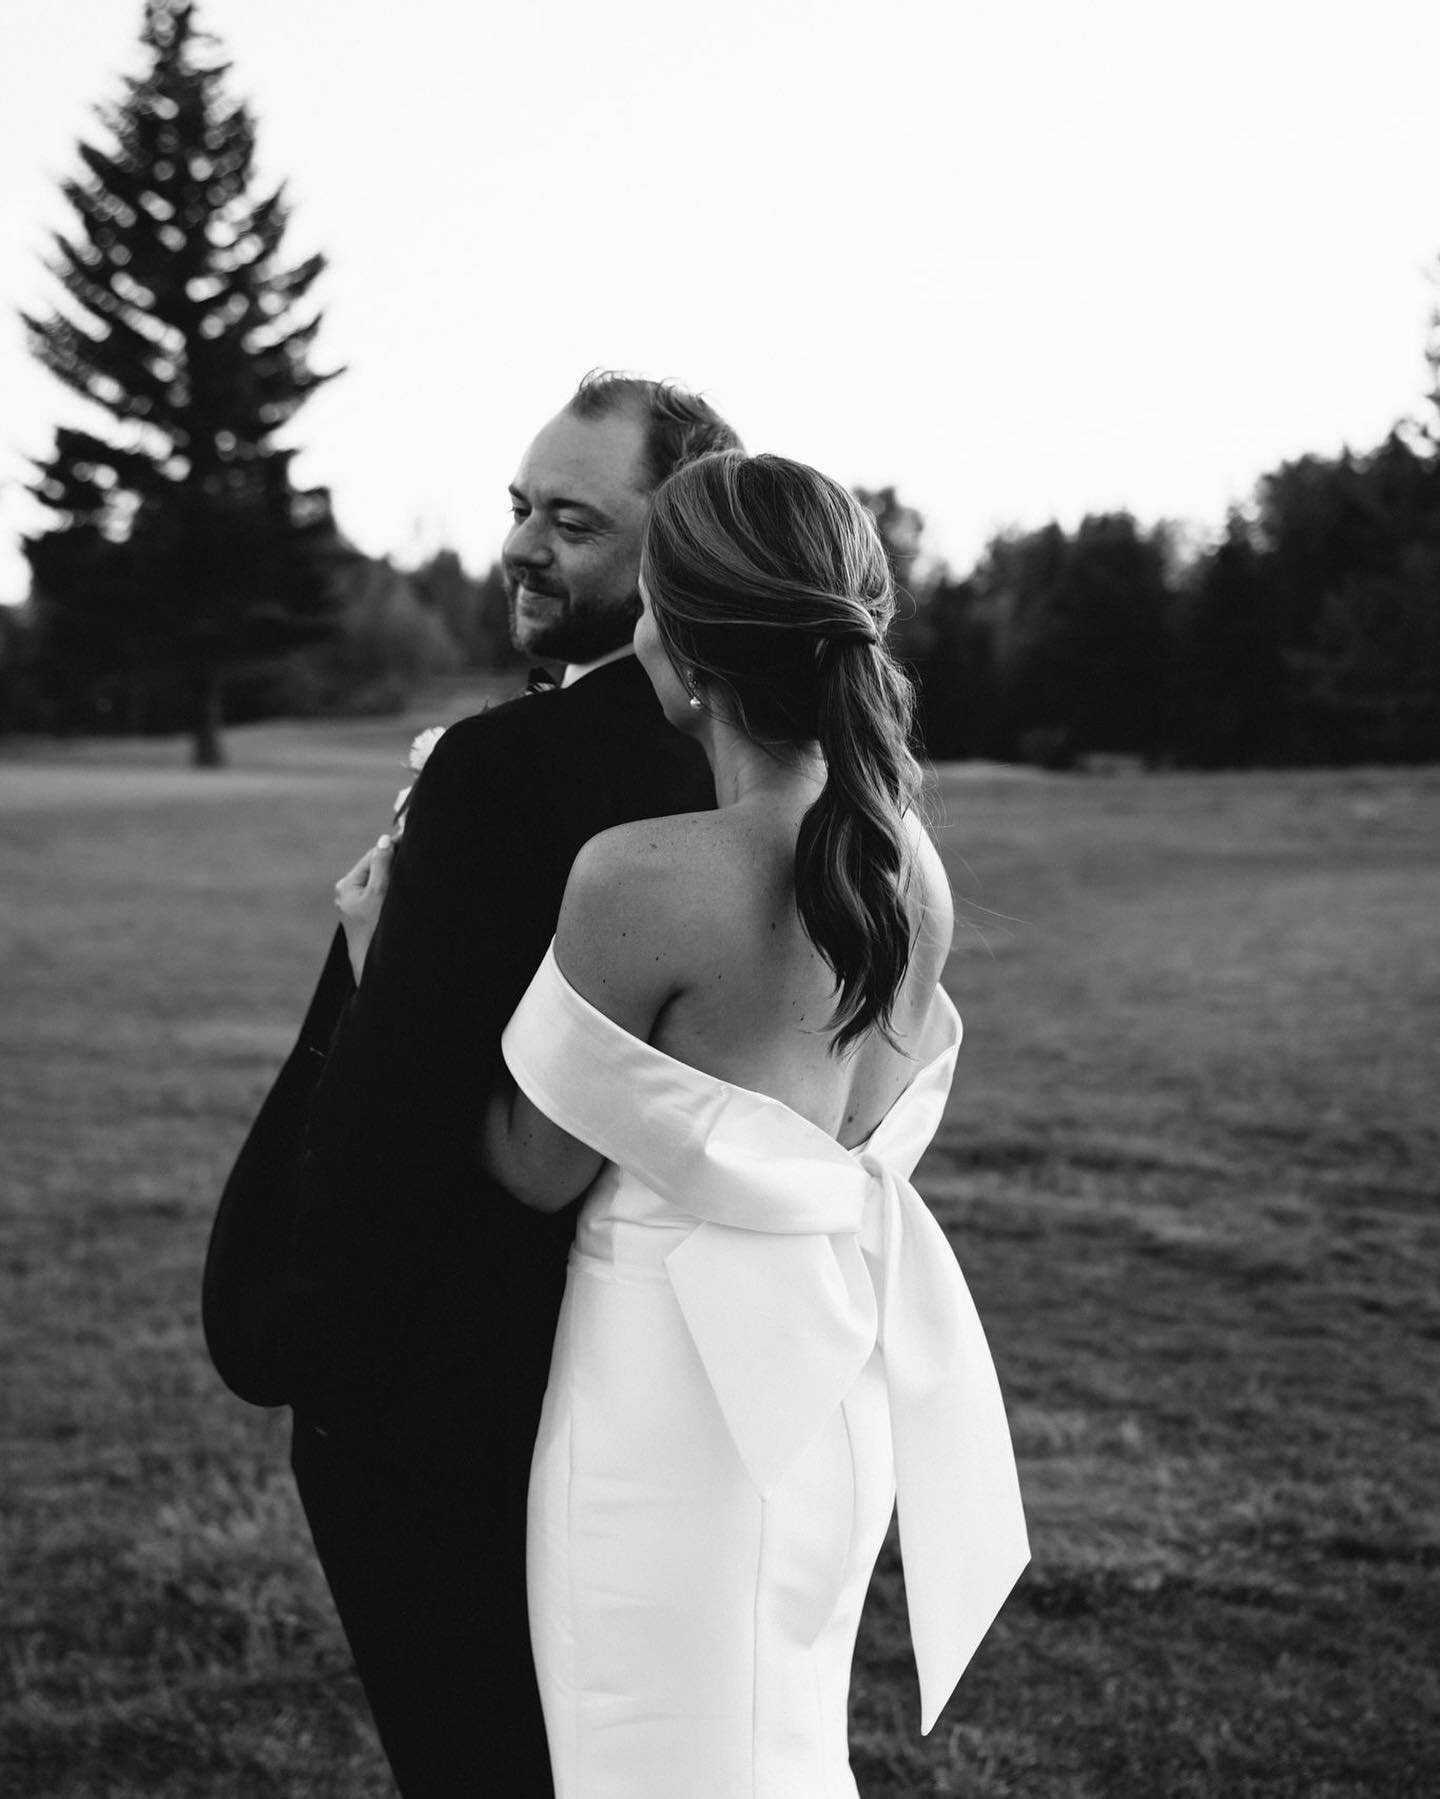 Sometimes I wish I could edit an entire wedding in black &amp; white